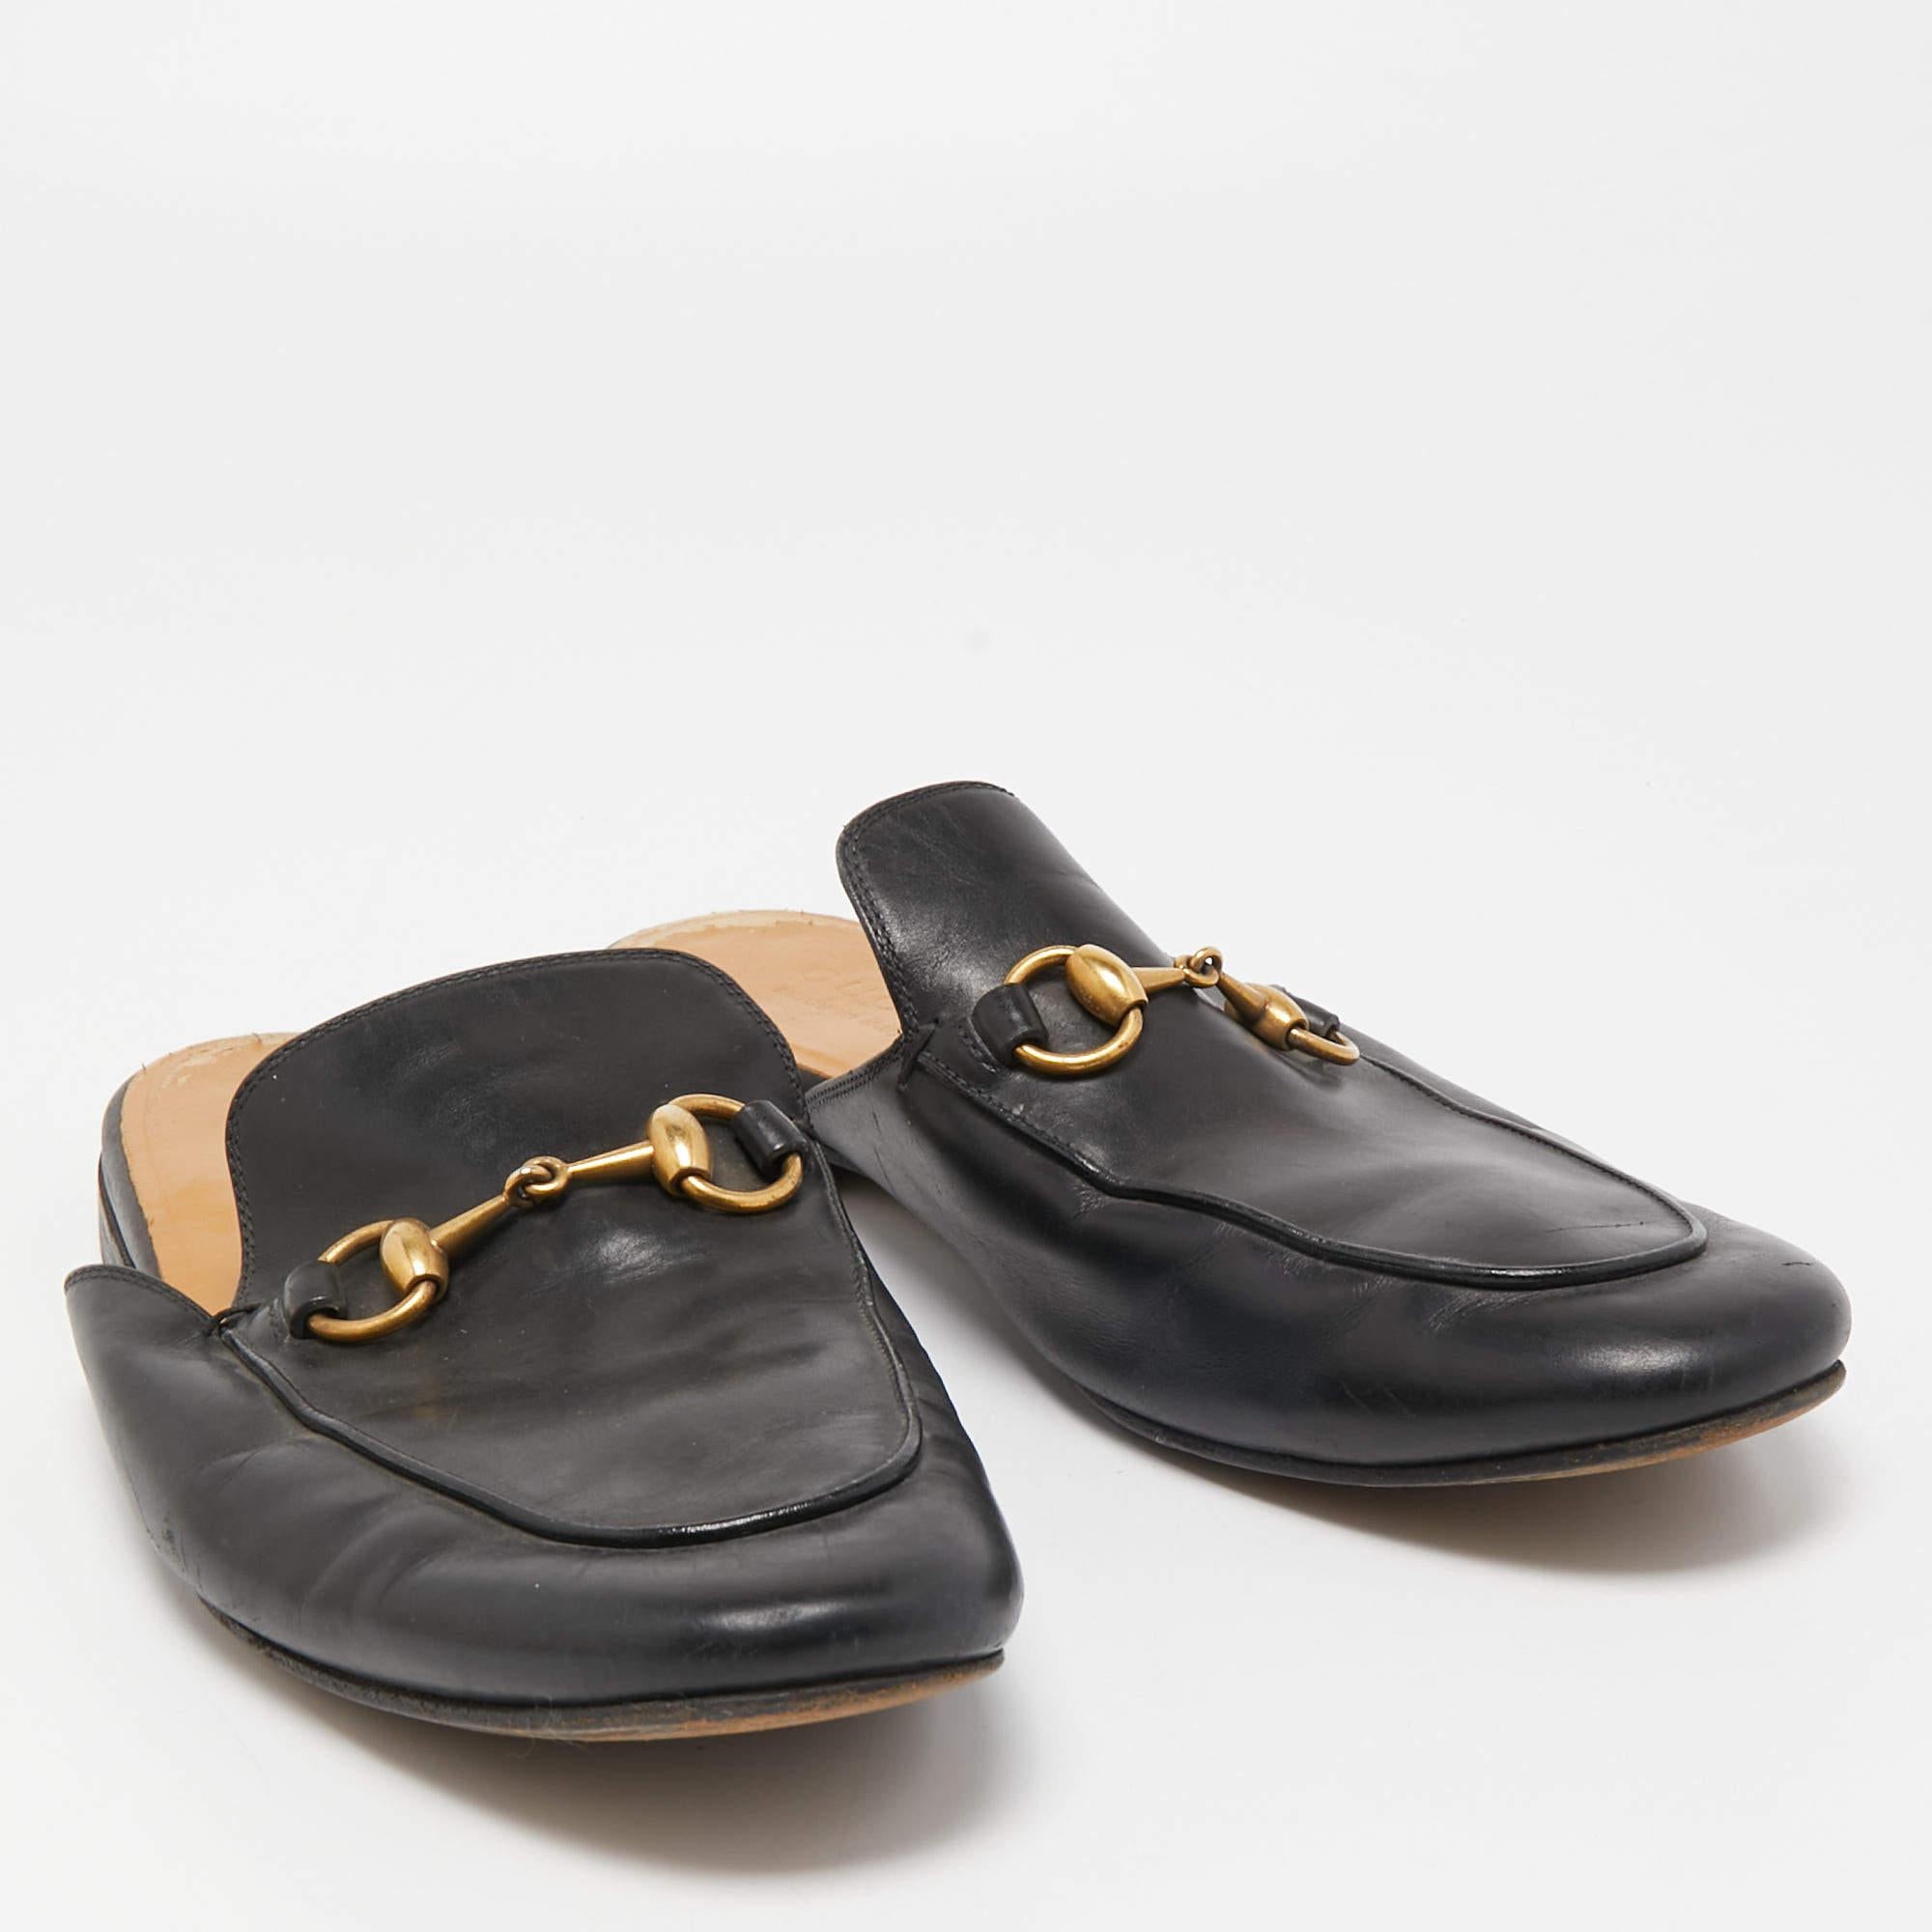 Gucci Black Leather Princetown Mules Size 41 1